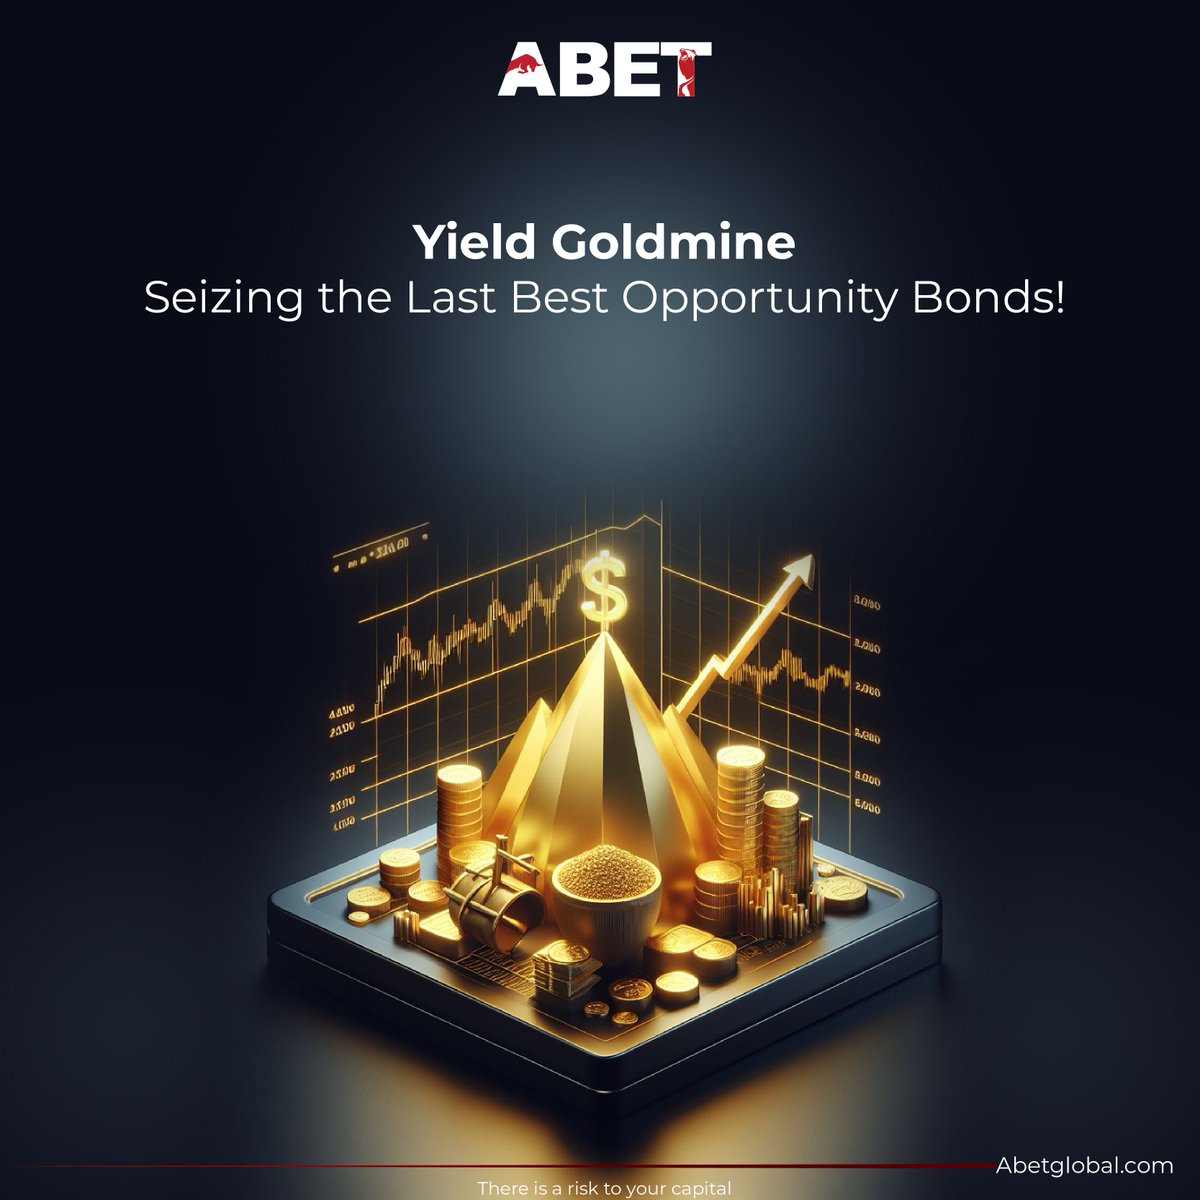 Yield Goldmine - Seizing the Last Best Opportunity Bonds!

Let's talk about maximizing our bond investments in today's market environment.
The buzz is all about 'last best opportunity bonds' – 

#BondInvesting #YieldOpportunities #FinancialStrategies #AbetGlobalInsights